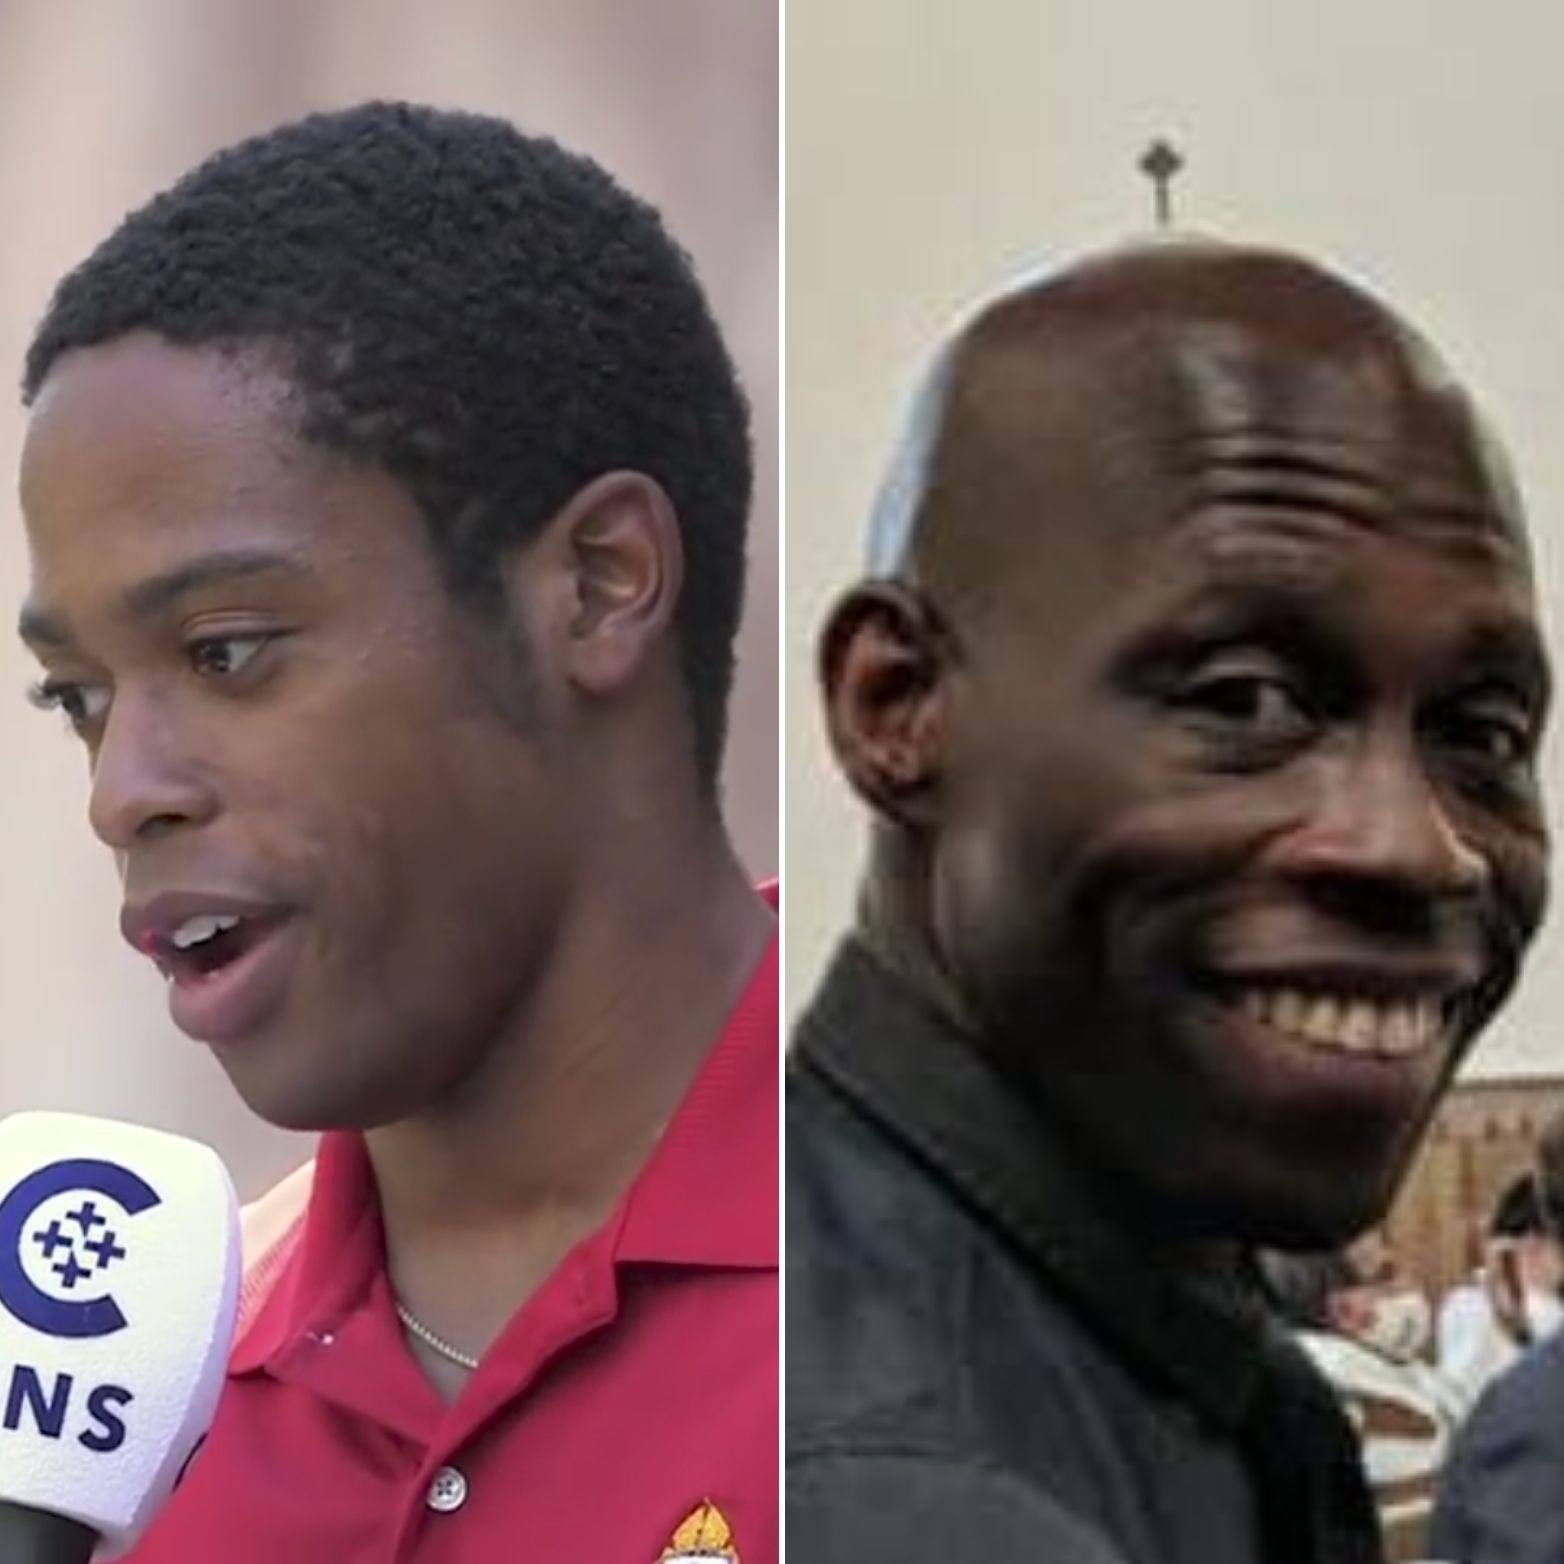 Two African Americans to be ordained Catholic priests on May 28th